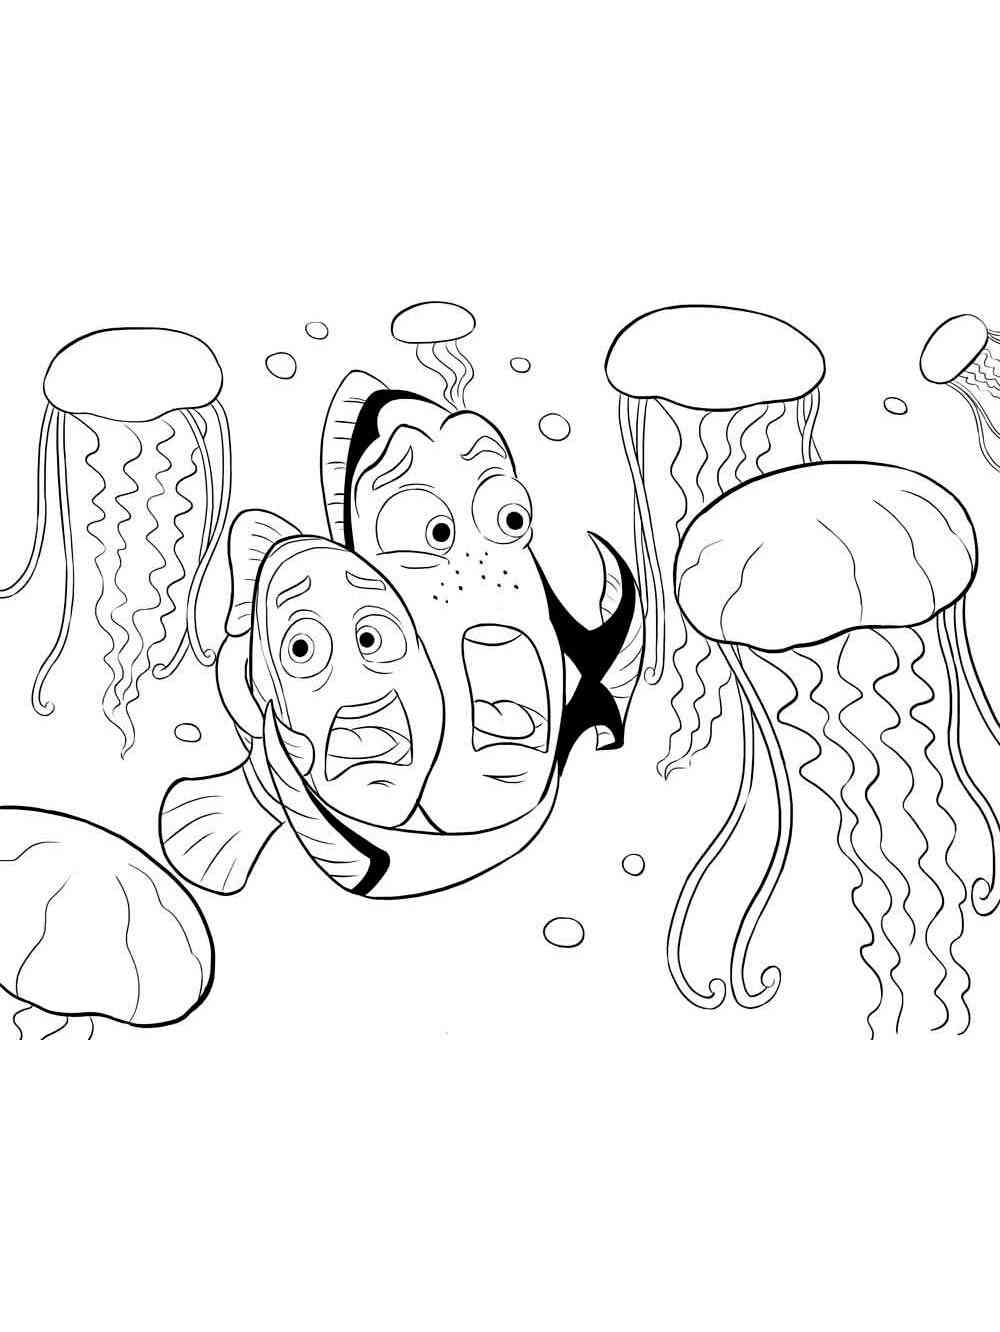 Finding Nemo 14 coloring page